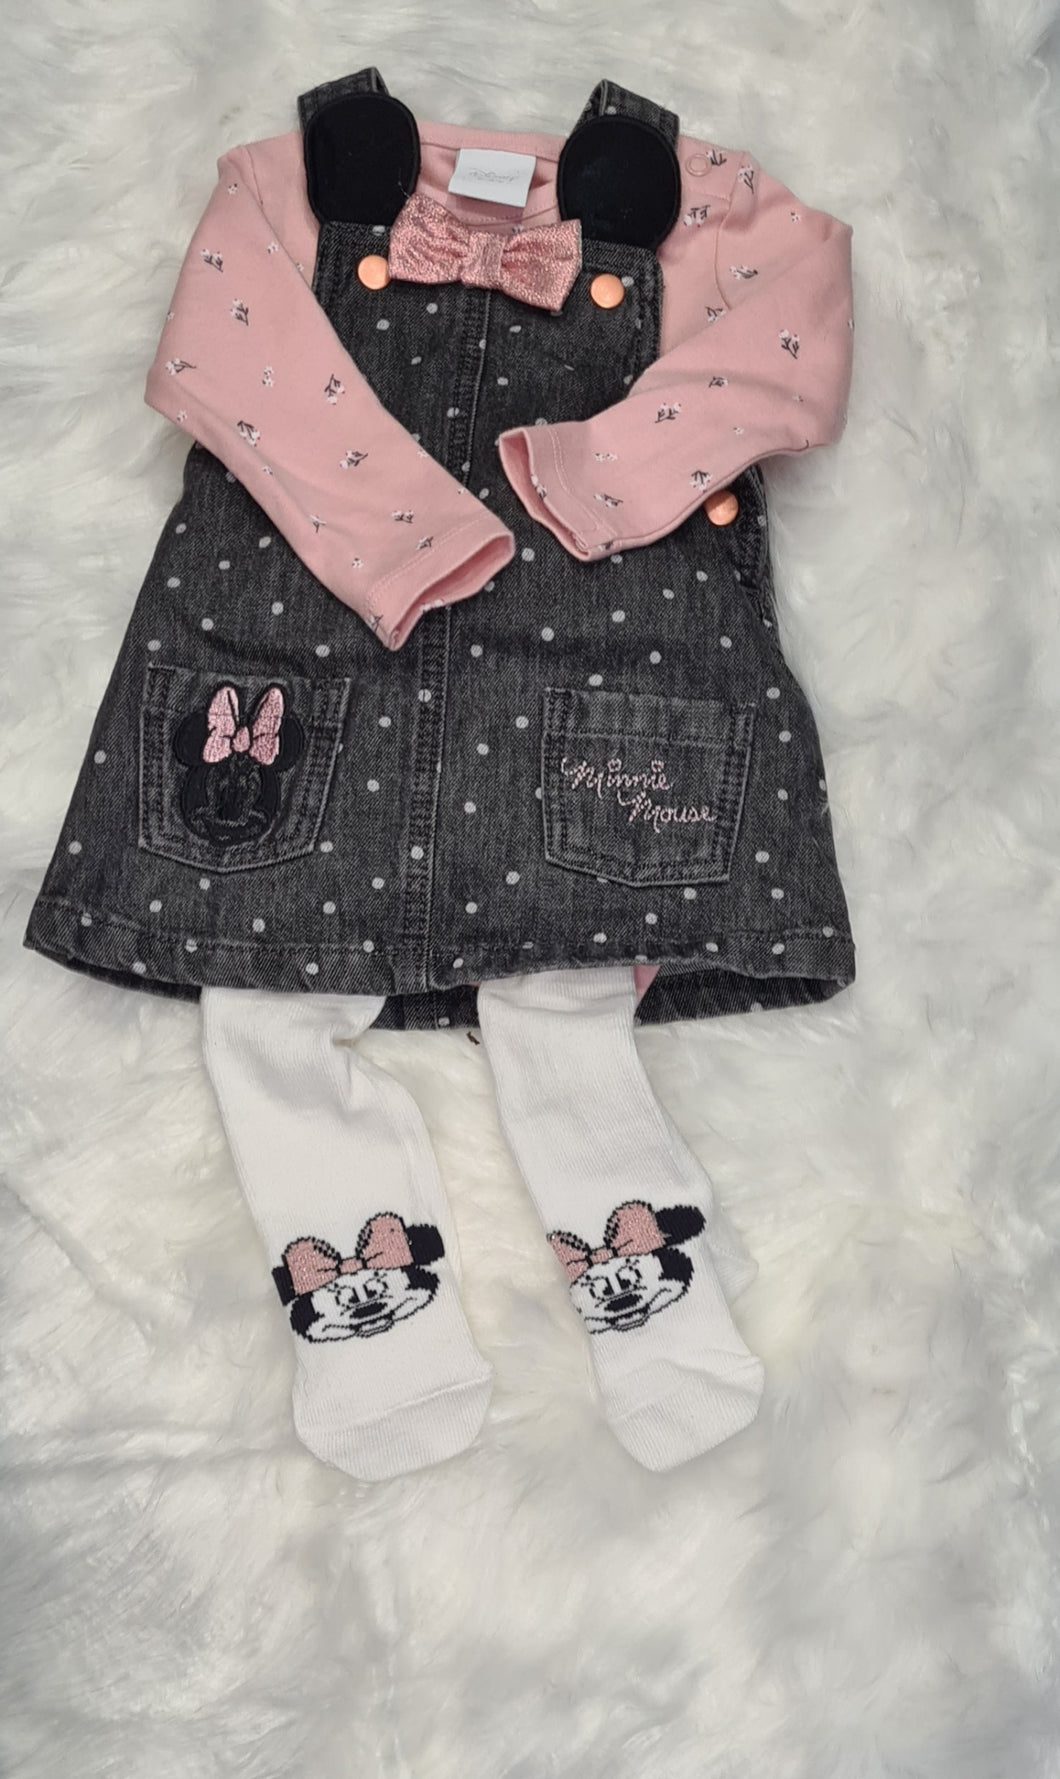 Girls 0-3 Months - Disney - Pink Minnie Mouse Vest - Dress and Tights Set